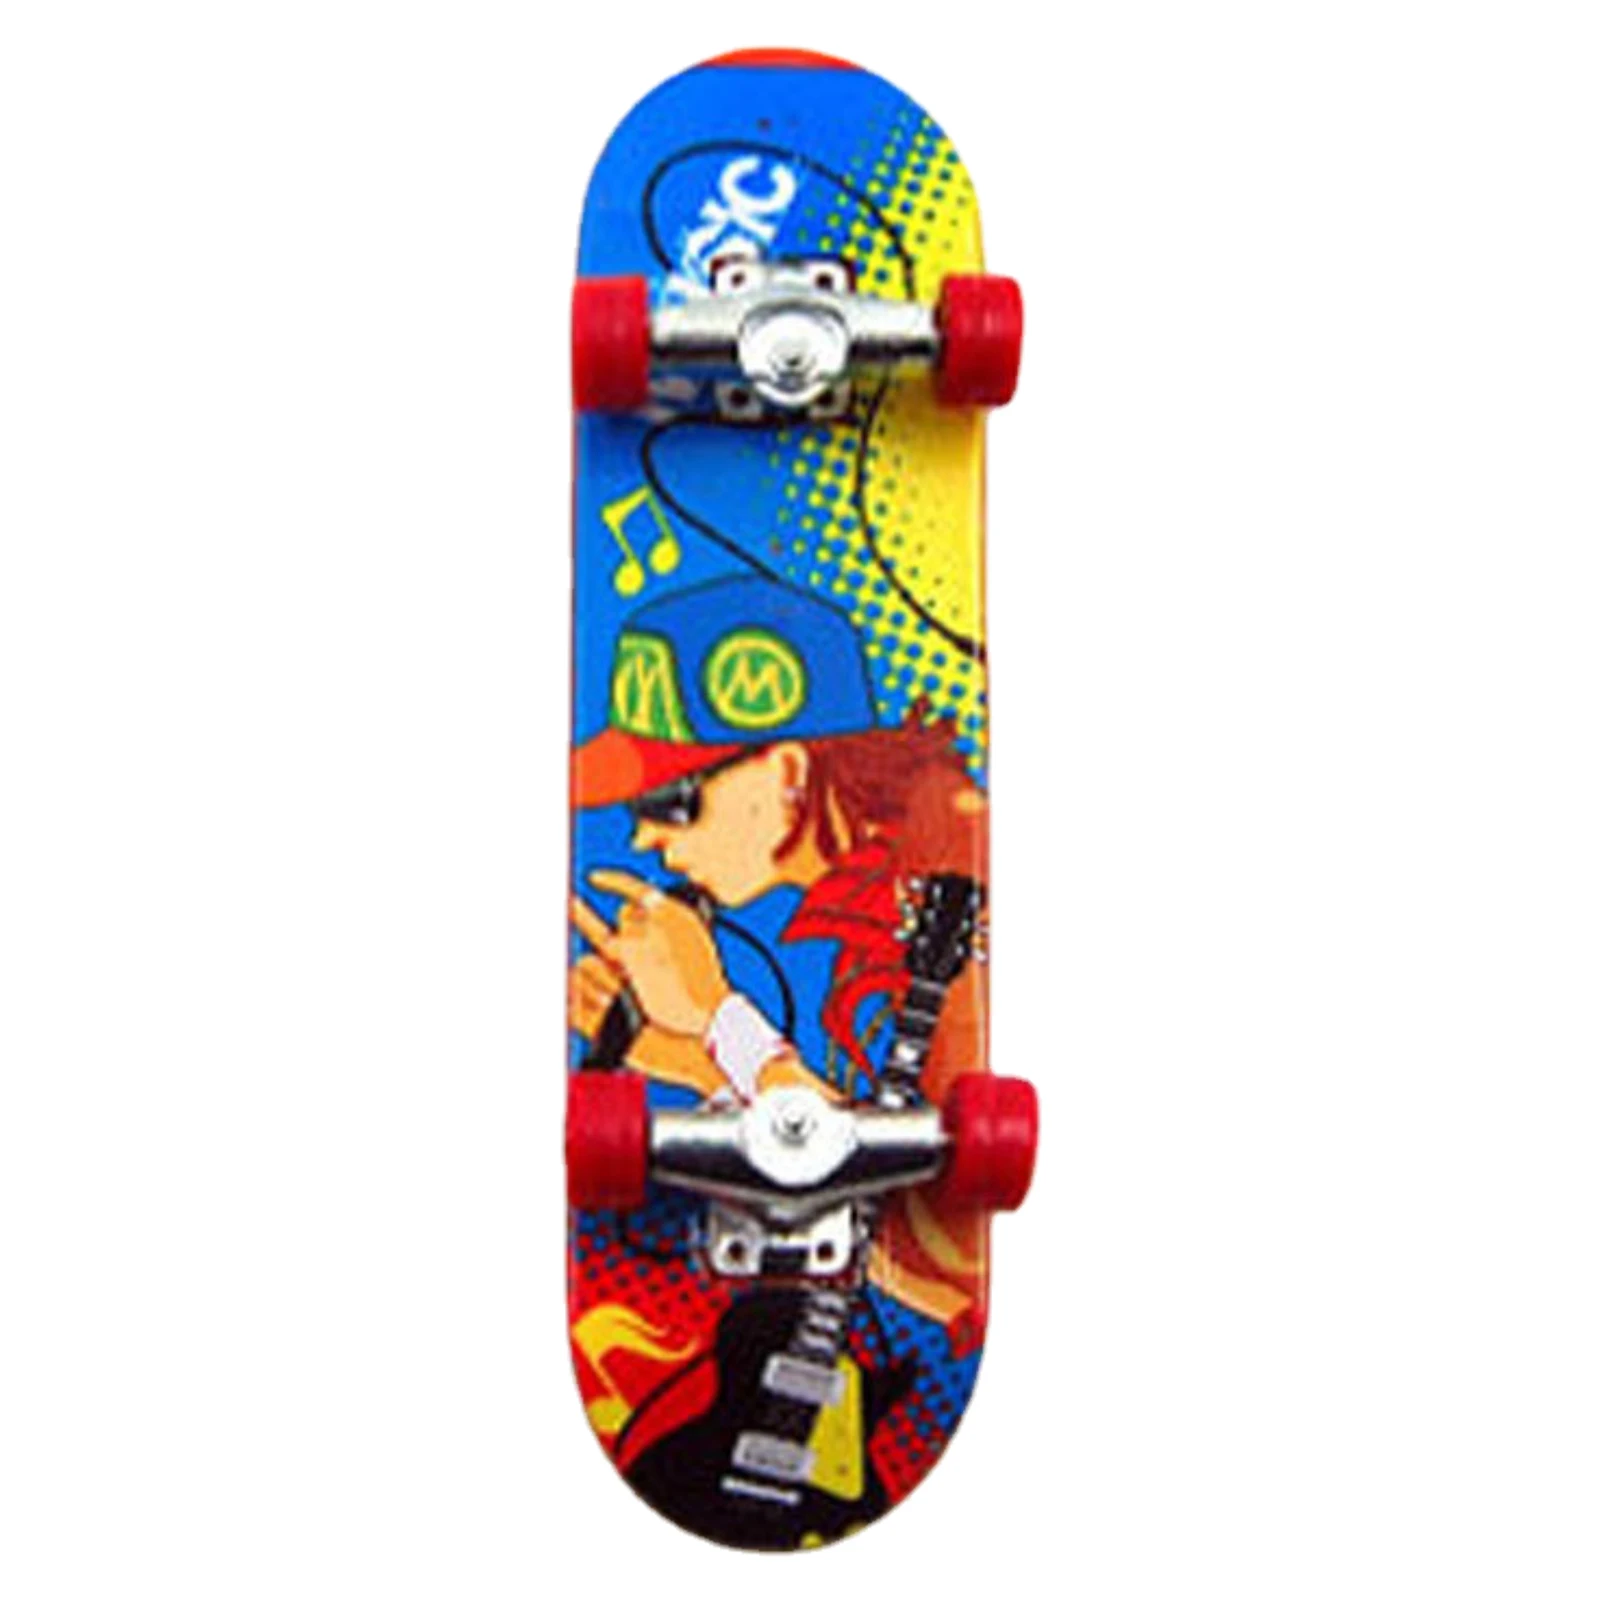 

Fingerboard Skateboard Colorful Printed Small Fingerboard Toy Creative Fingertips Movement Mini Longboard Party Skater Party